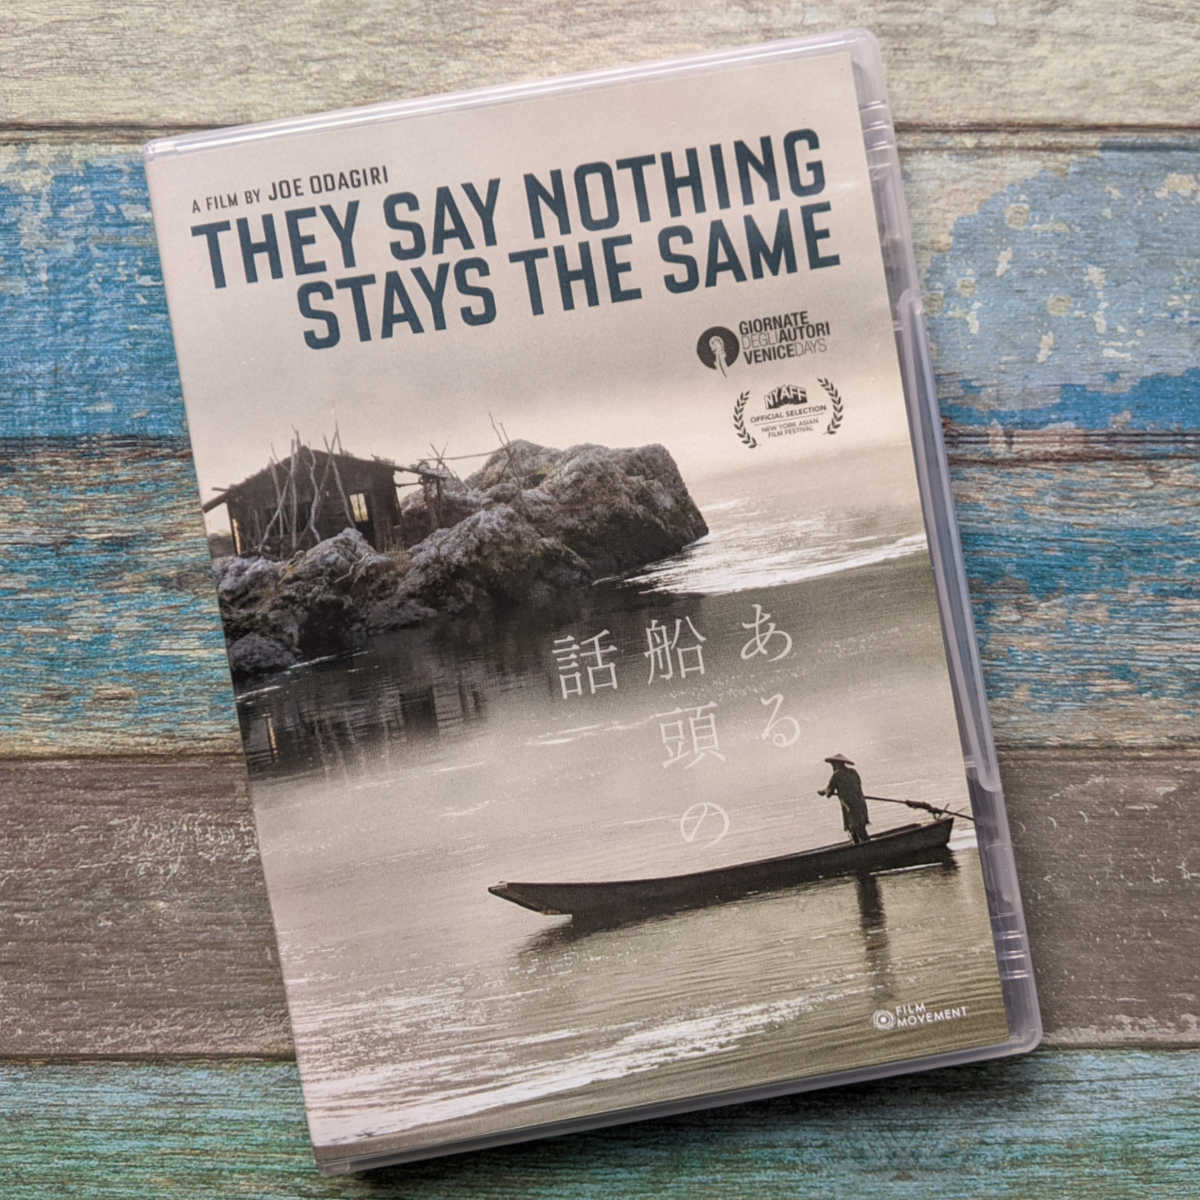 They Say Nothing Stays The Same is a must watch film from Japan which looks at the issues of accepting inevitable change or fighting against it. 